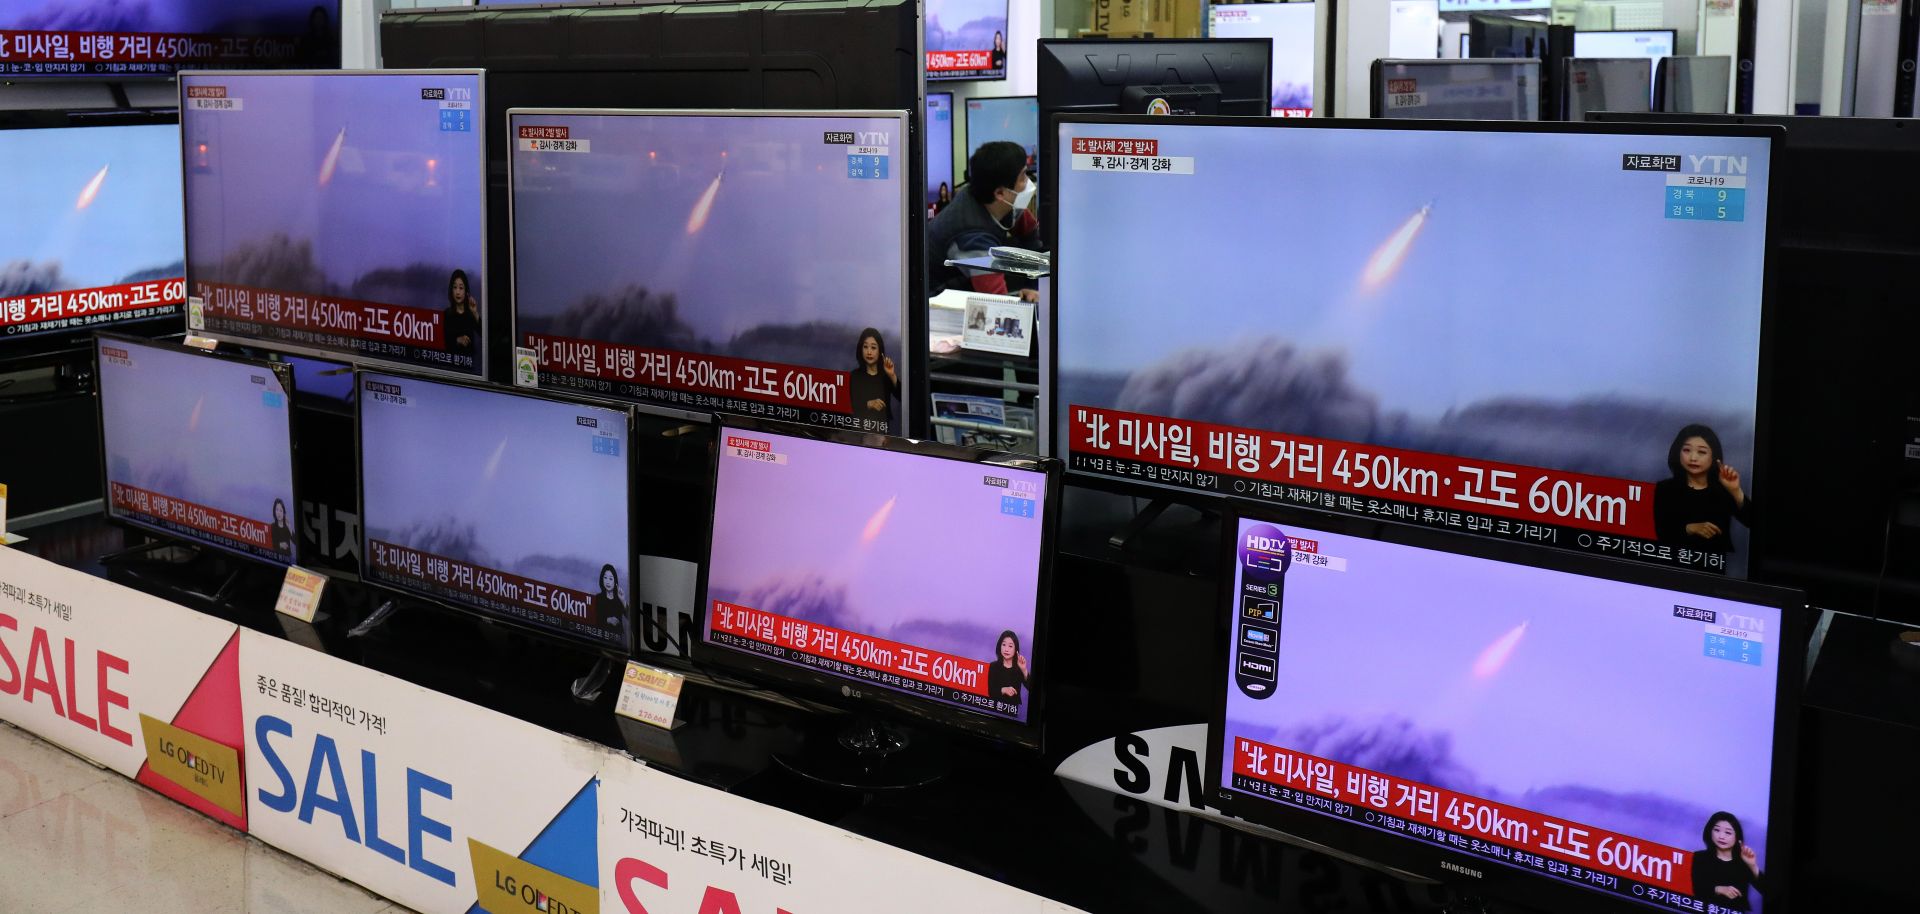 TV screens show the launch of North Korean missiles on March 25, 2021, in Seoul, South Korea. 